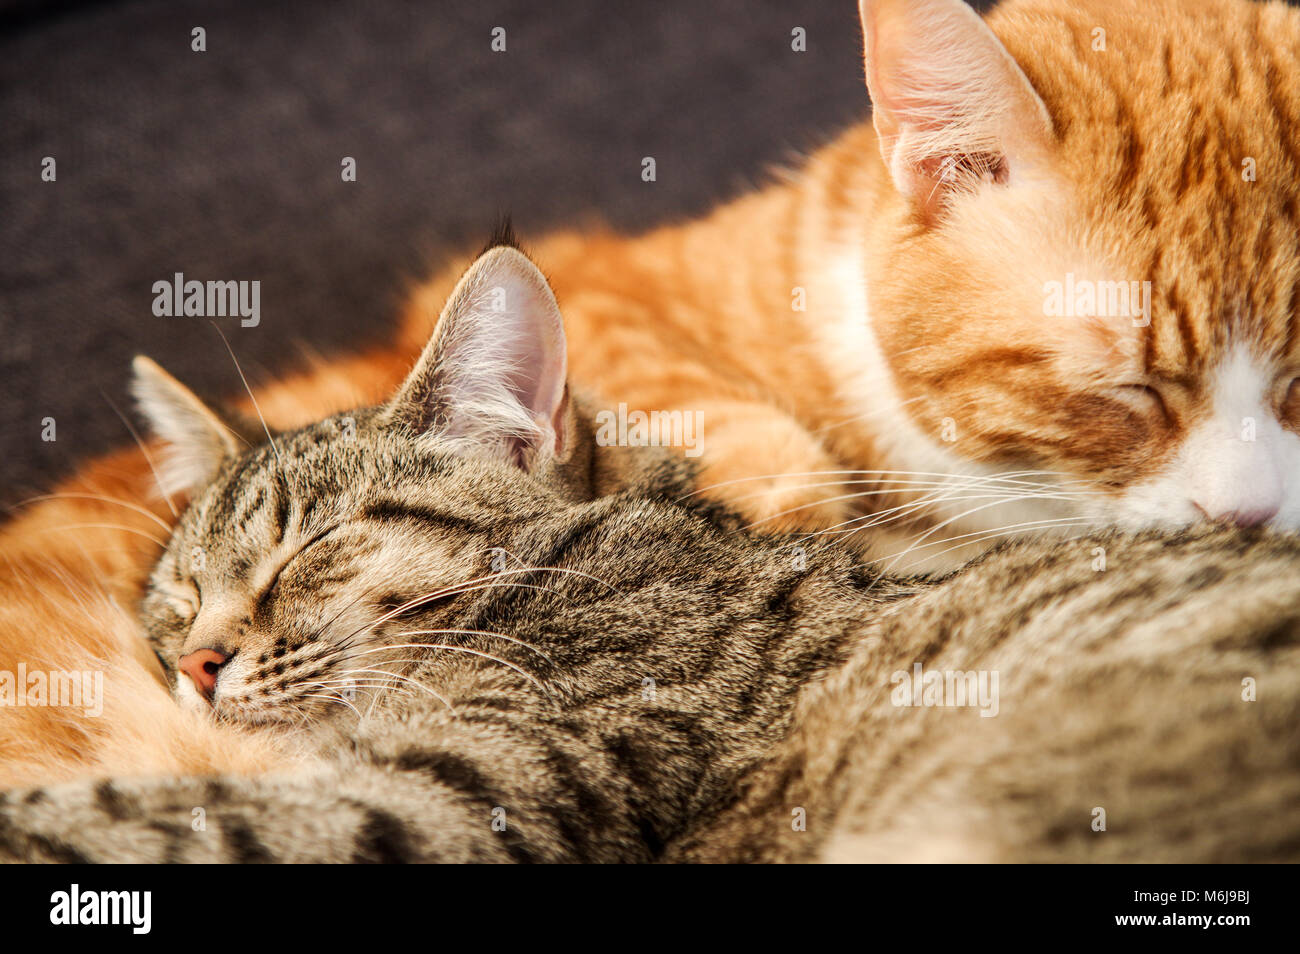 A young tabby and a large adult ginger cat cuddled up together in their sleep Stock Photo